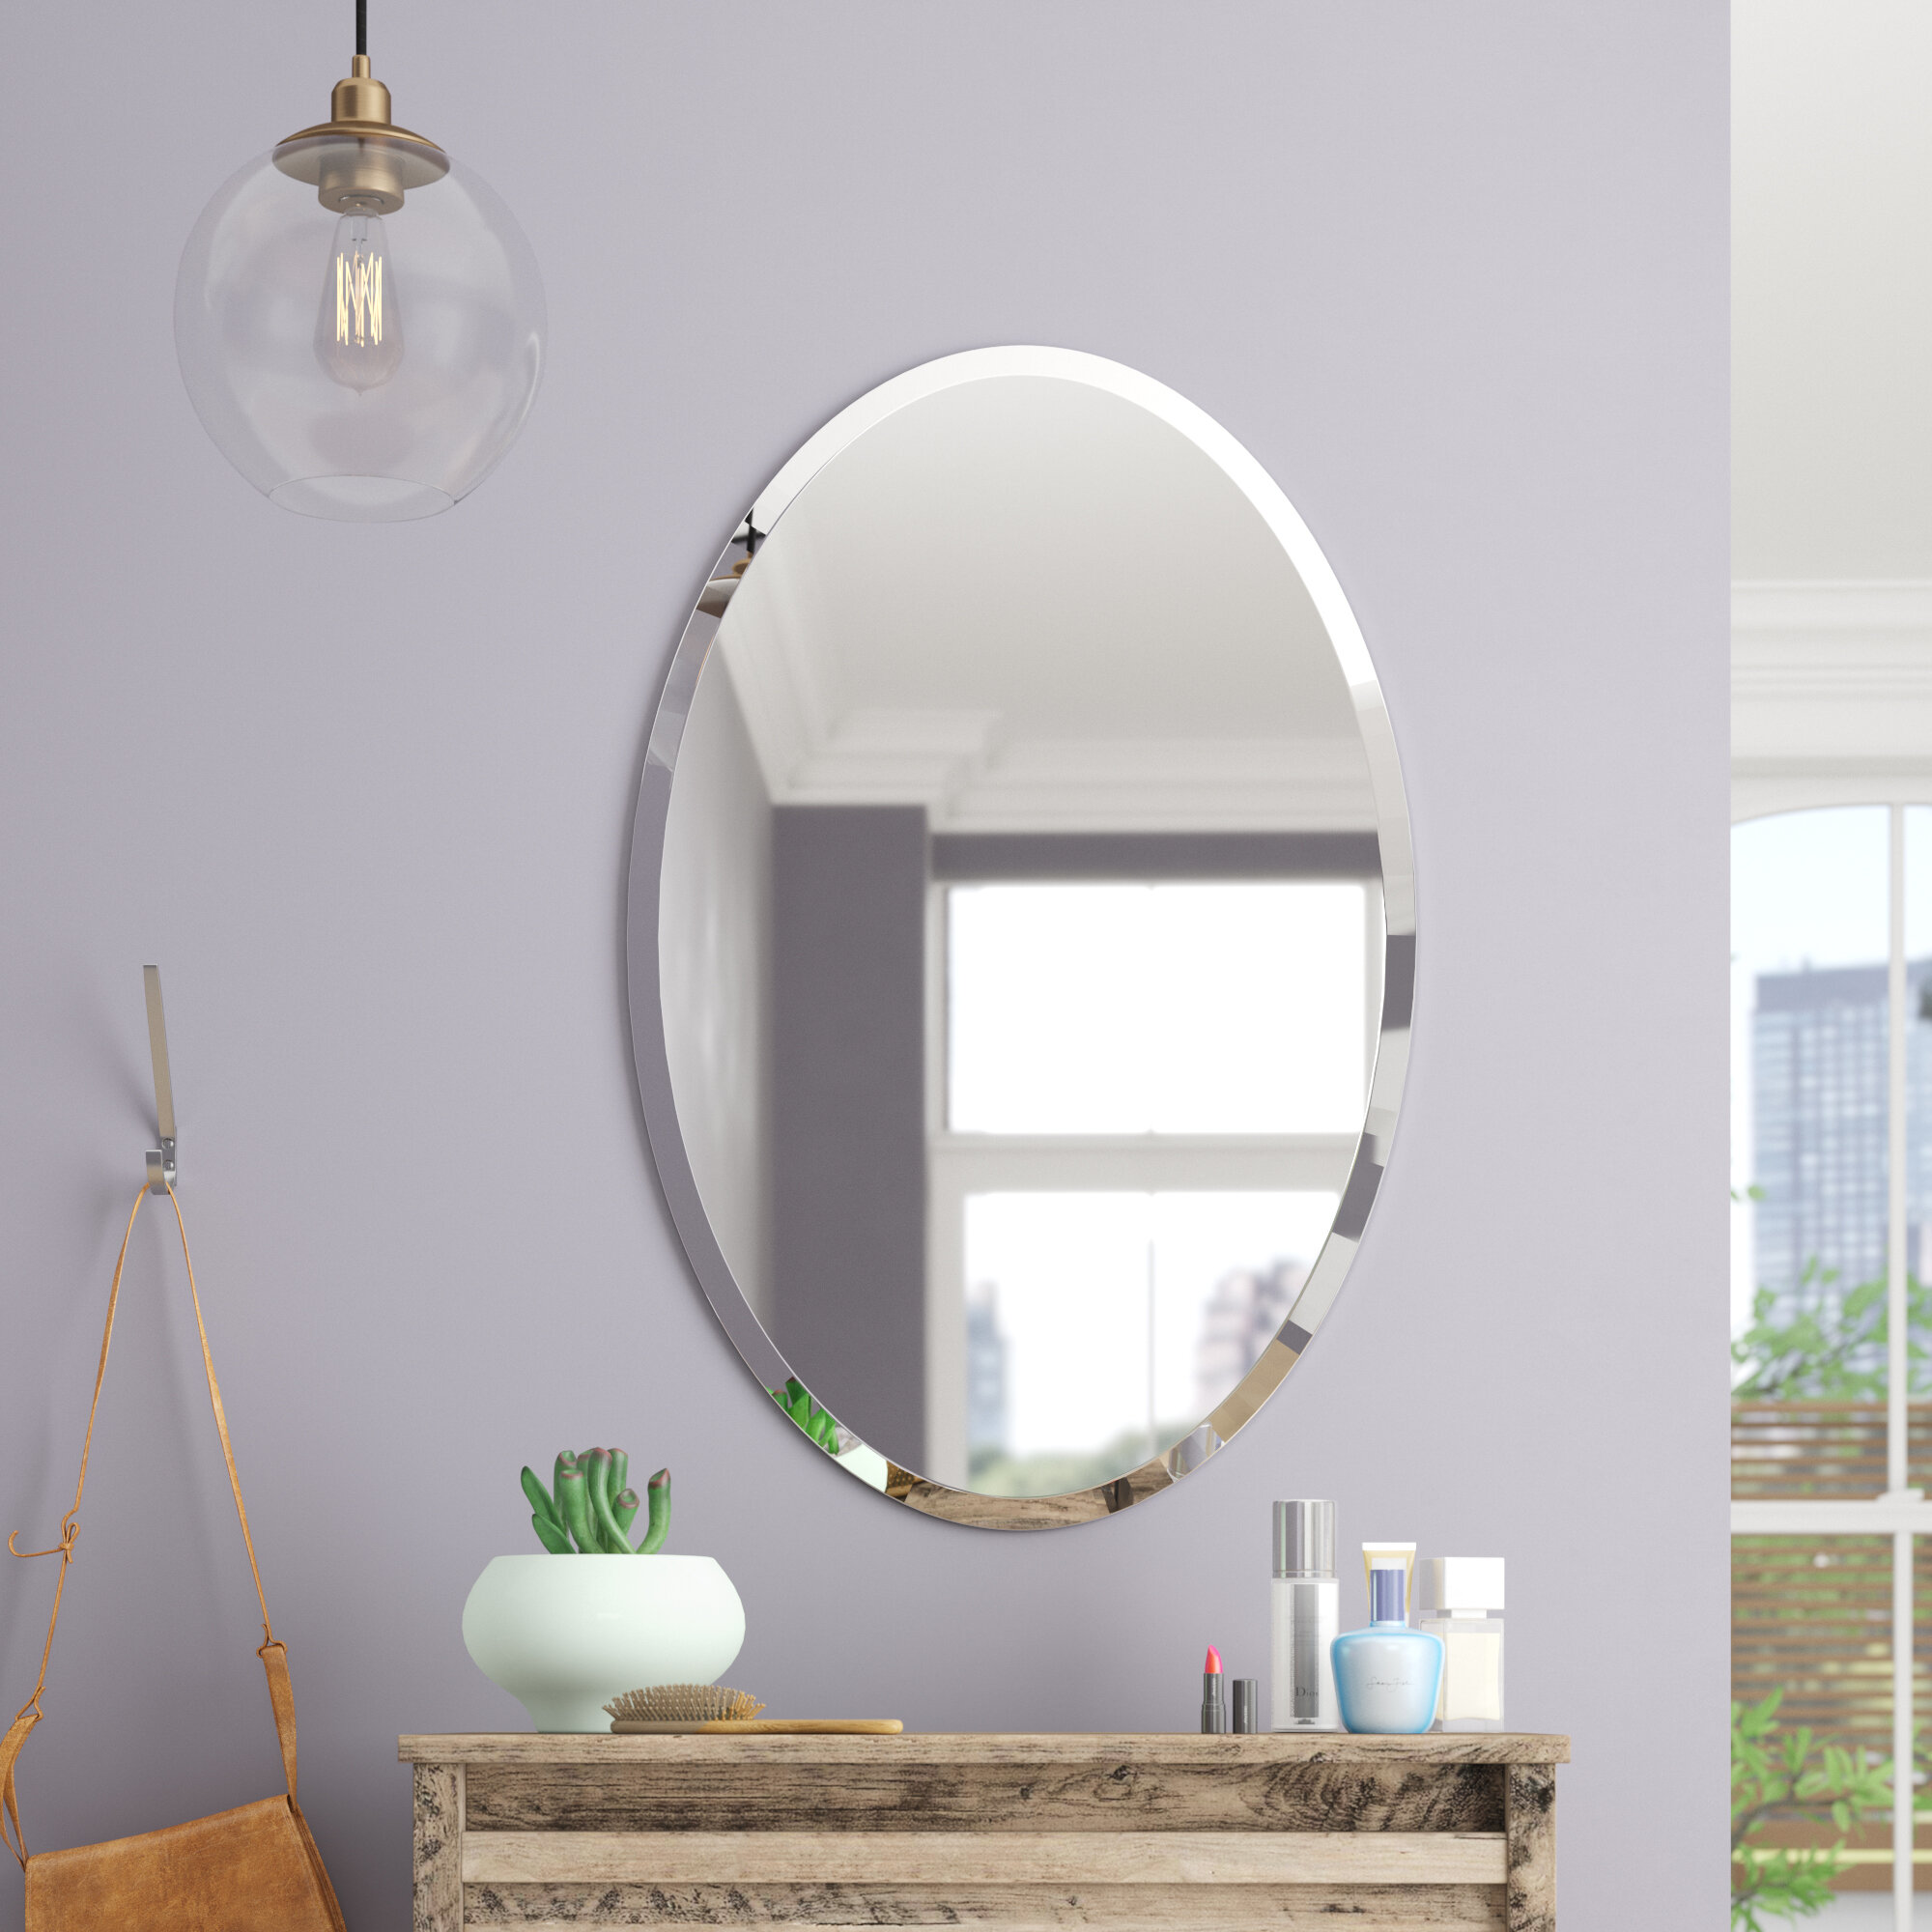 Oval Bathroom Mirrors You'll Love in 